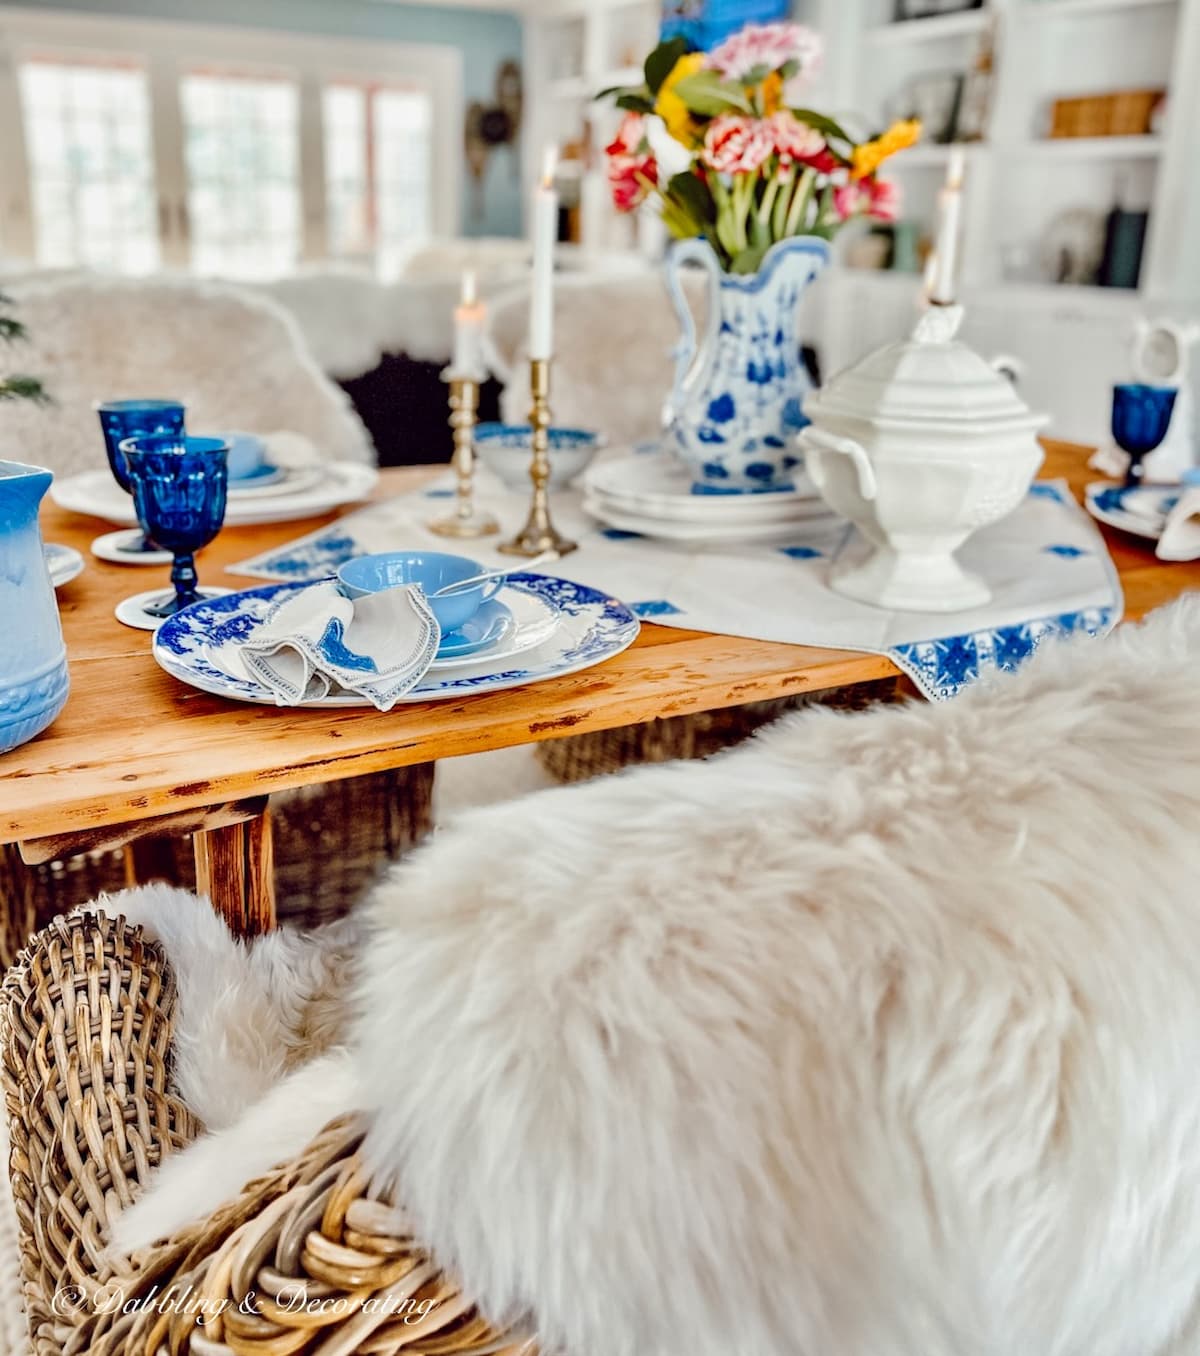 Table with vintage textiles and silverware flatware.